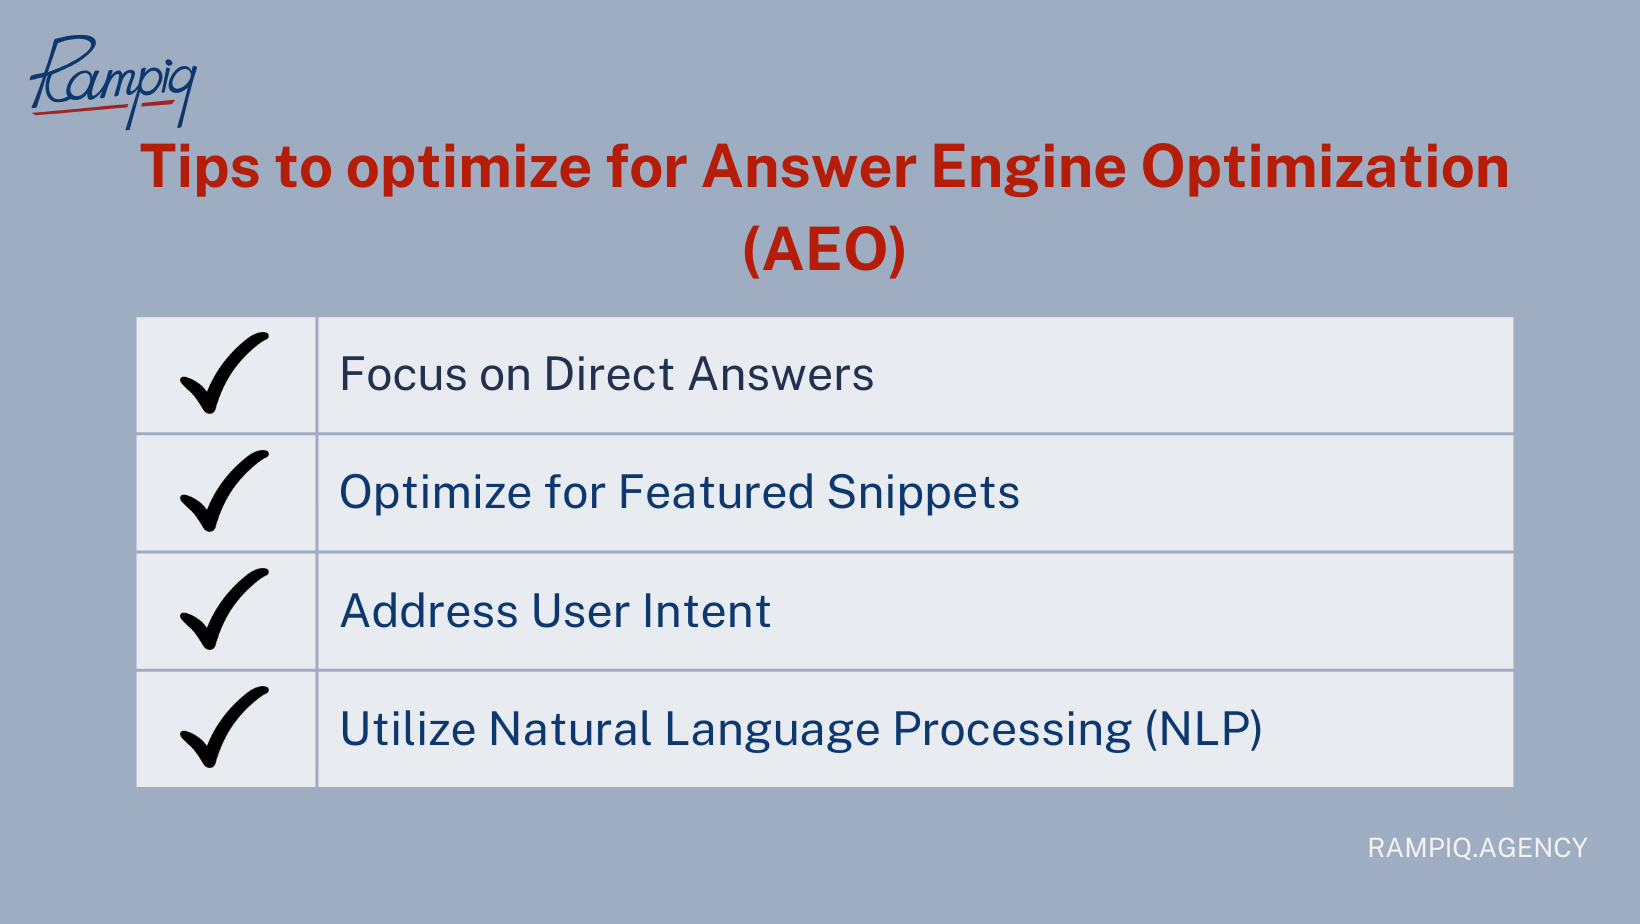 Tips to optimize for Answer Engine Optimization (AEO)